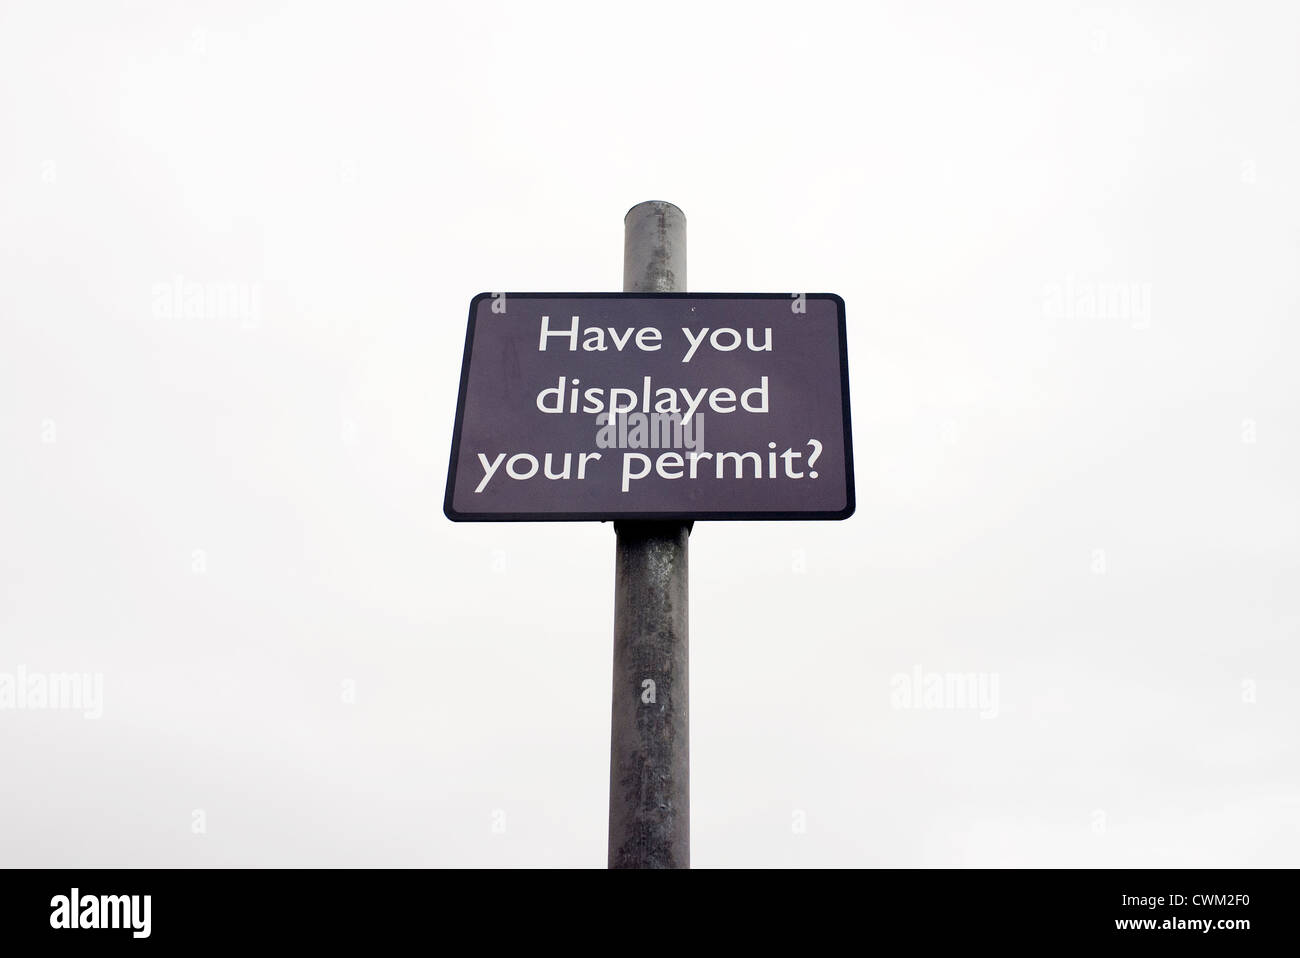 have you displayed your permit sign Stock Photo